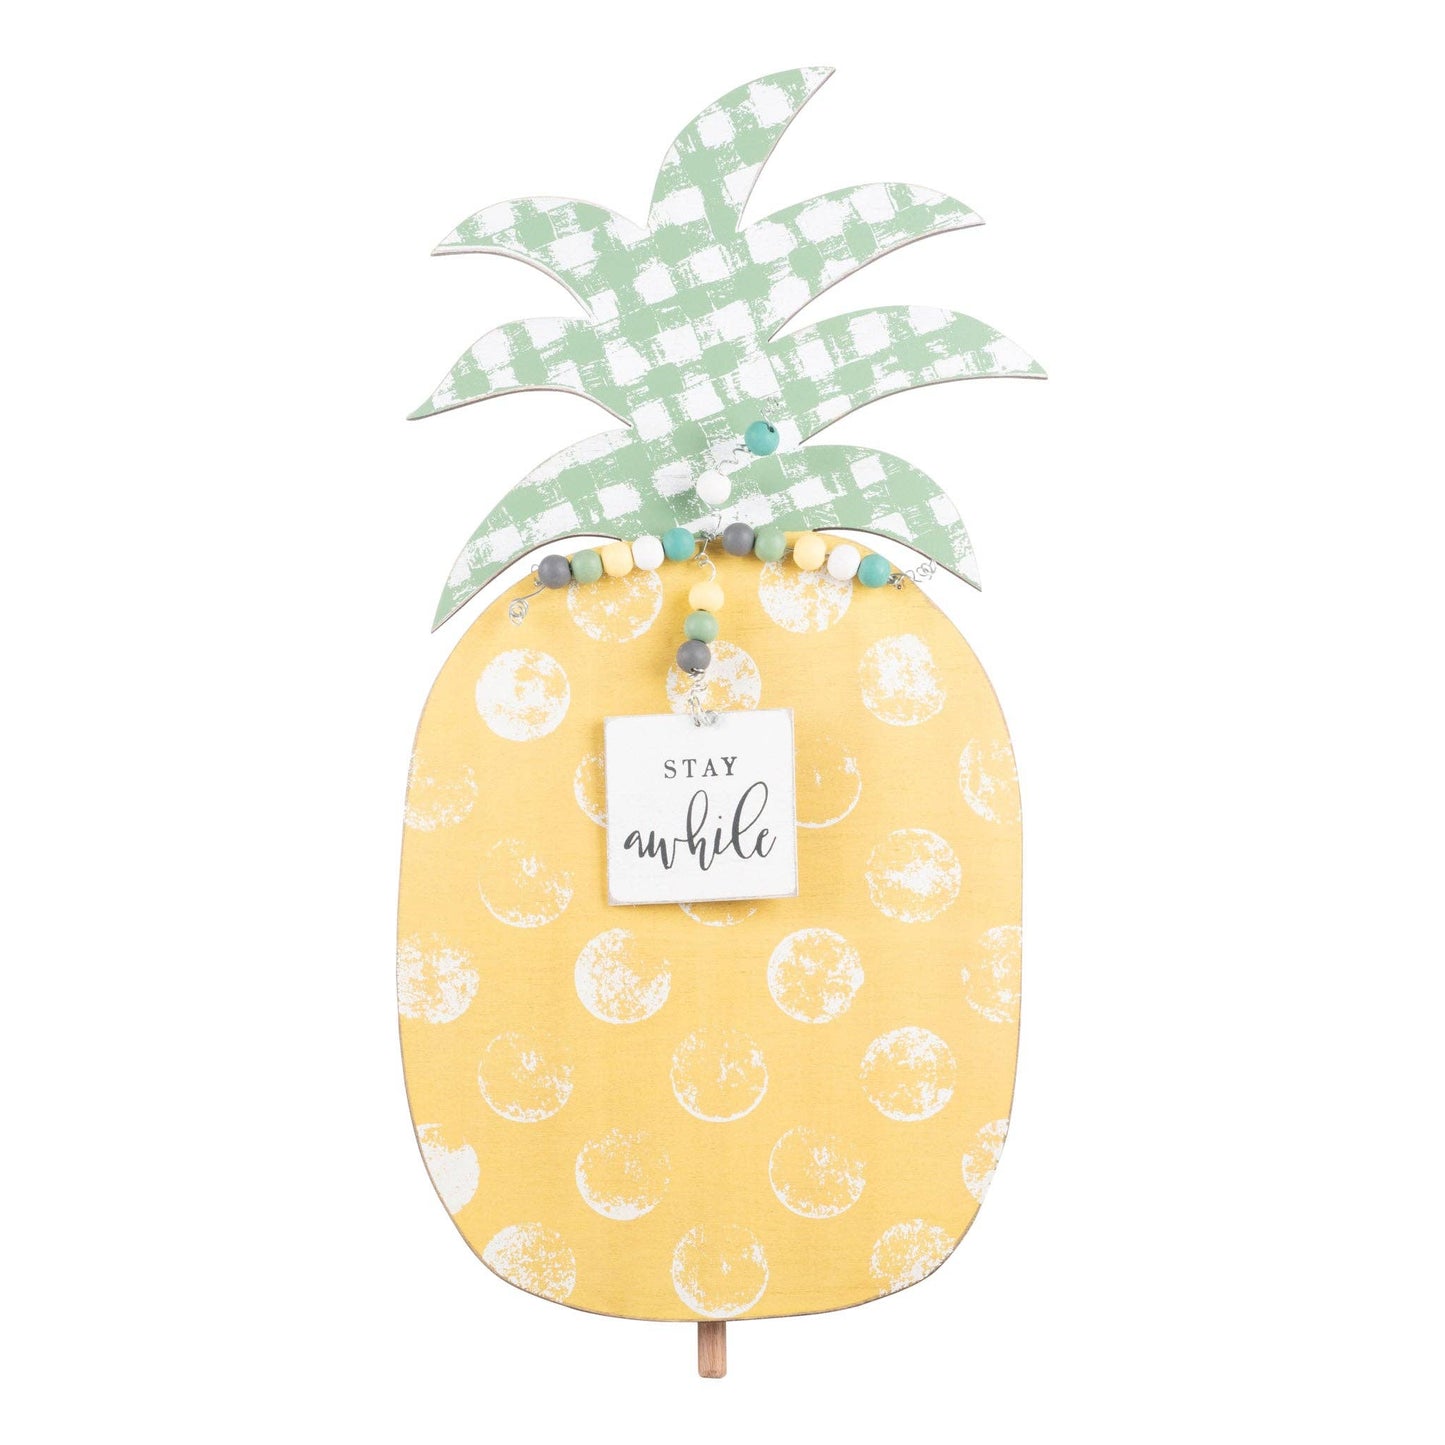 Glory Haus - Stay Awhile Pineapple Topper